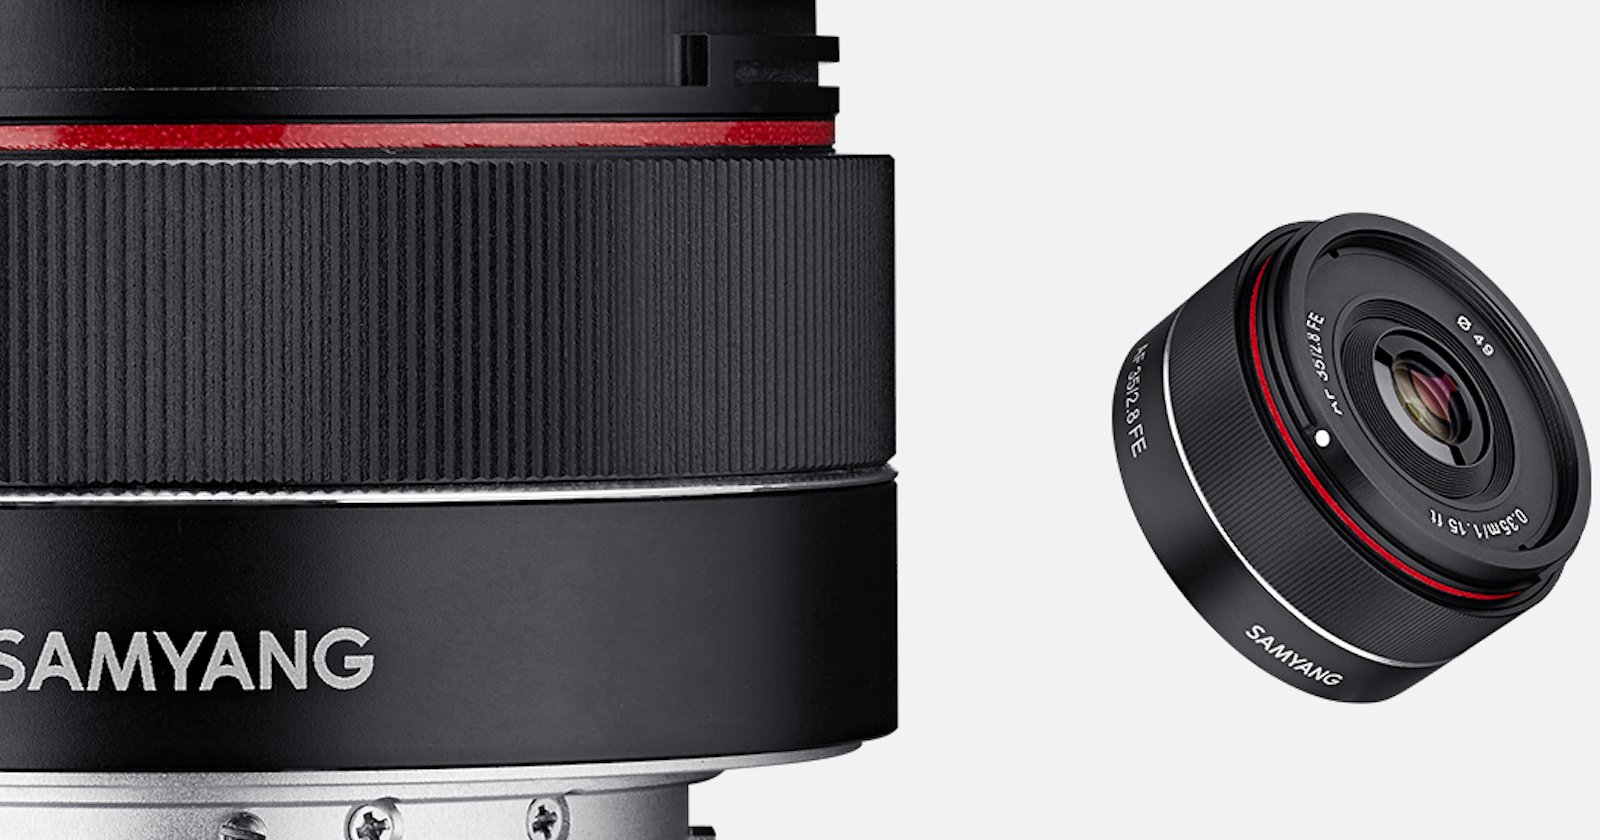 Samyang Unveils Tiny, Affordable 35mm f/2.8 Autofocus Lens for Sony